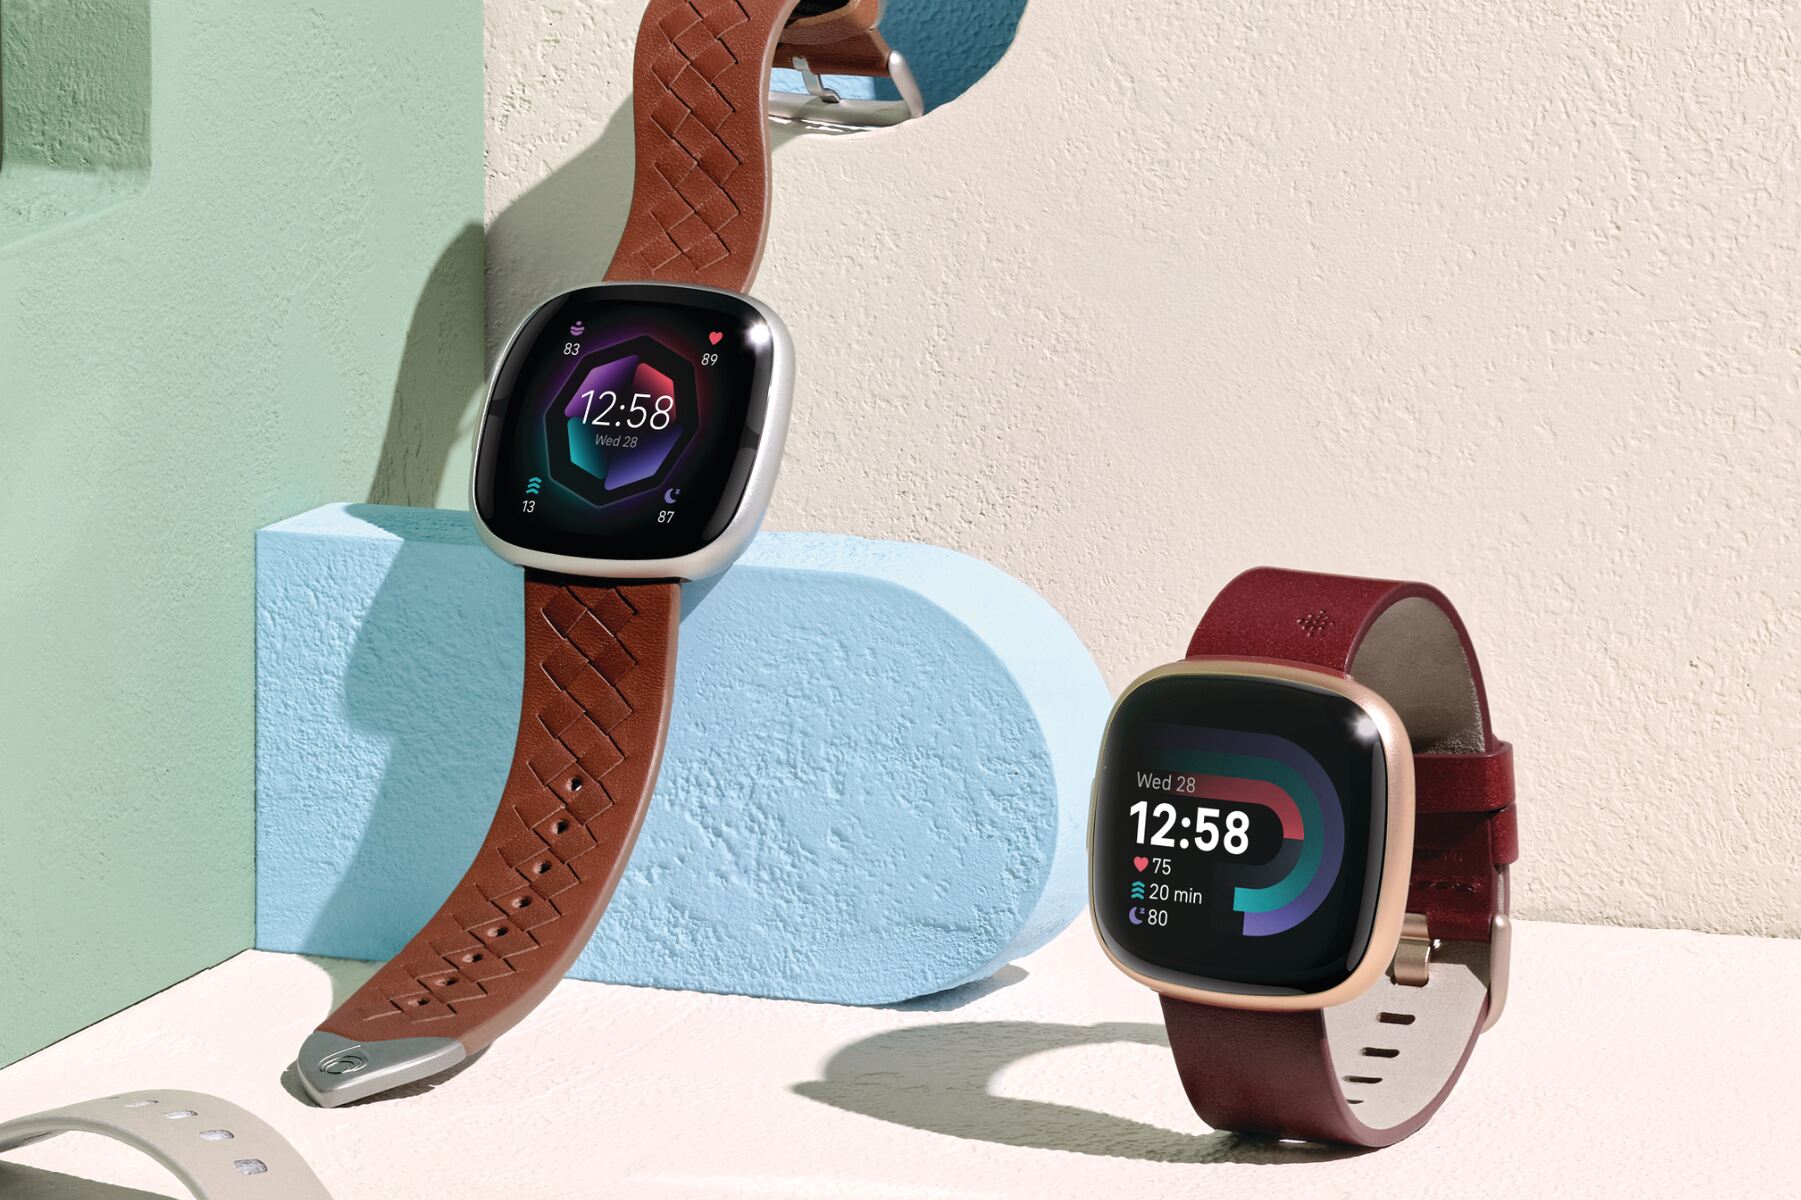 sense-2-vs-versa-4-comparing-features-to-determine-the-better-fitbit